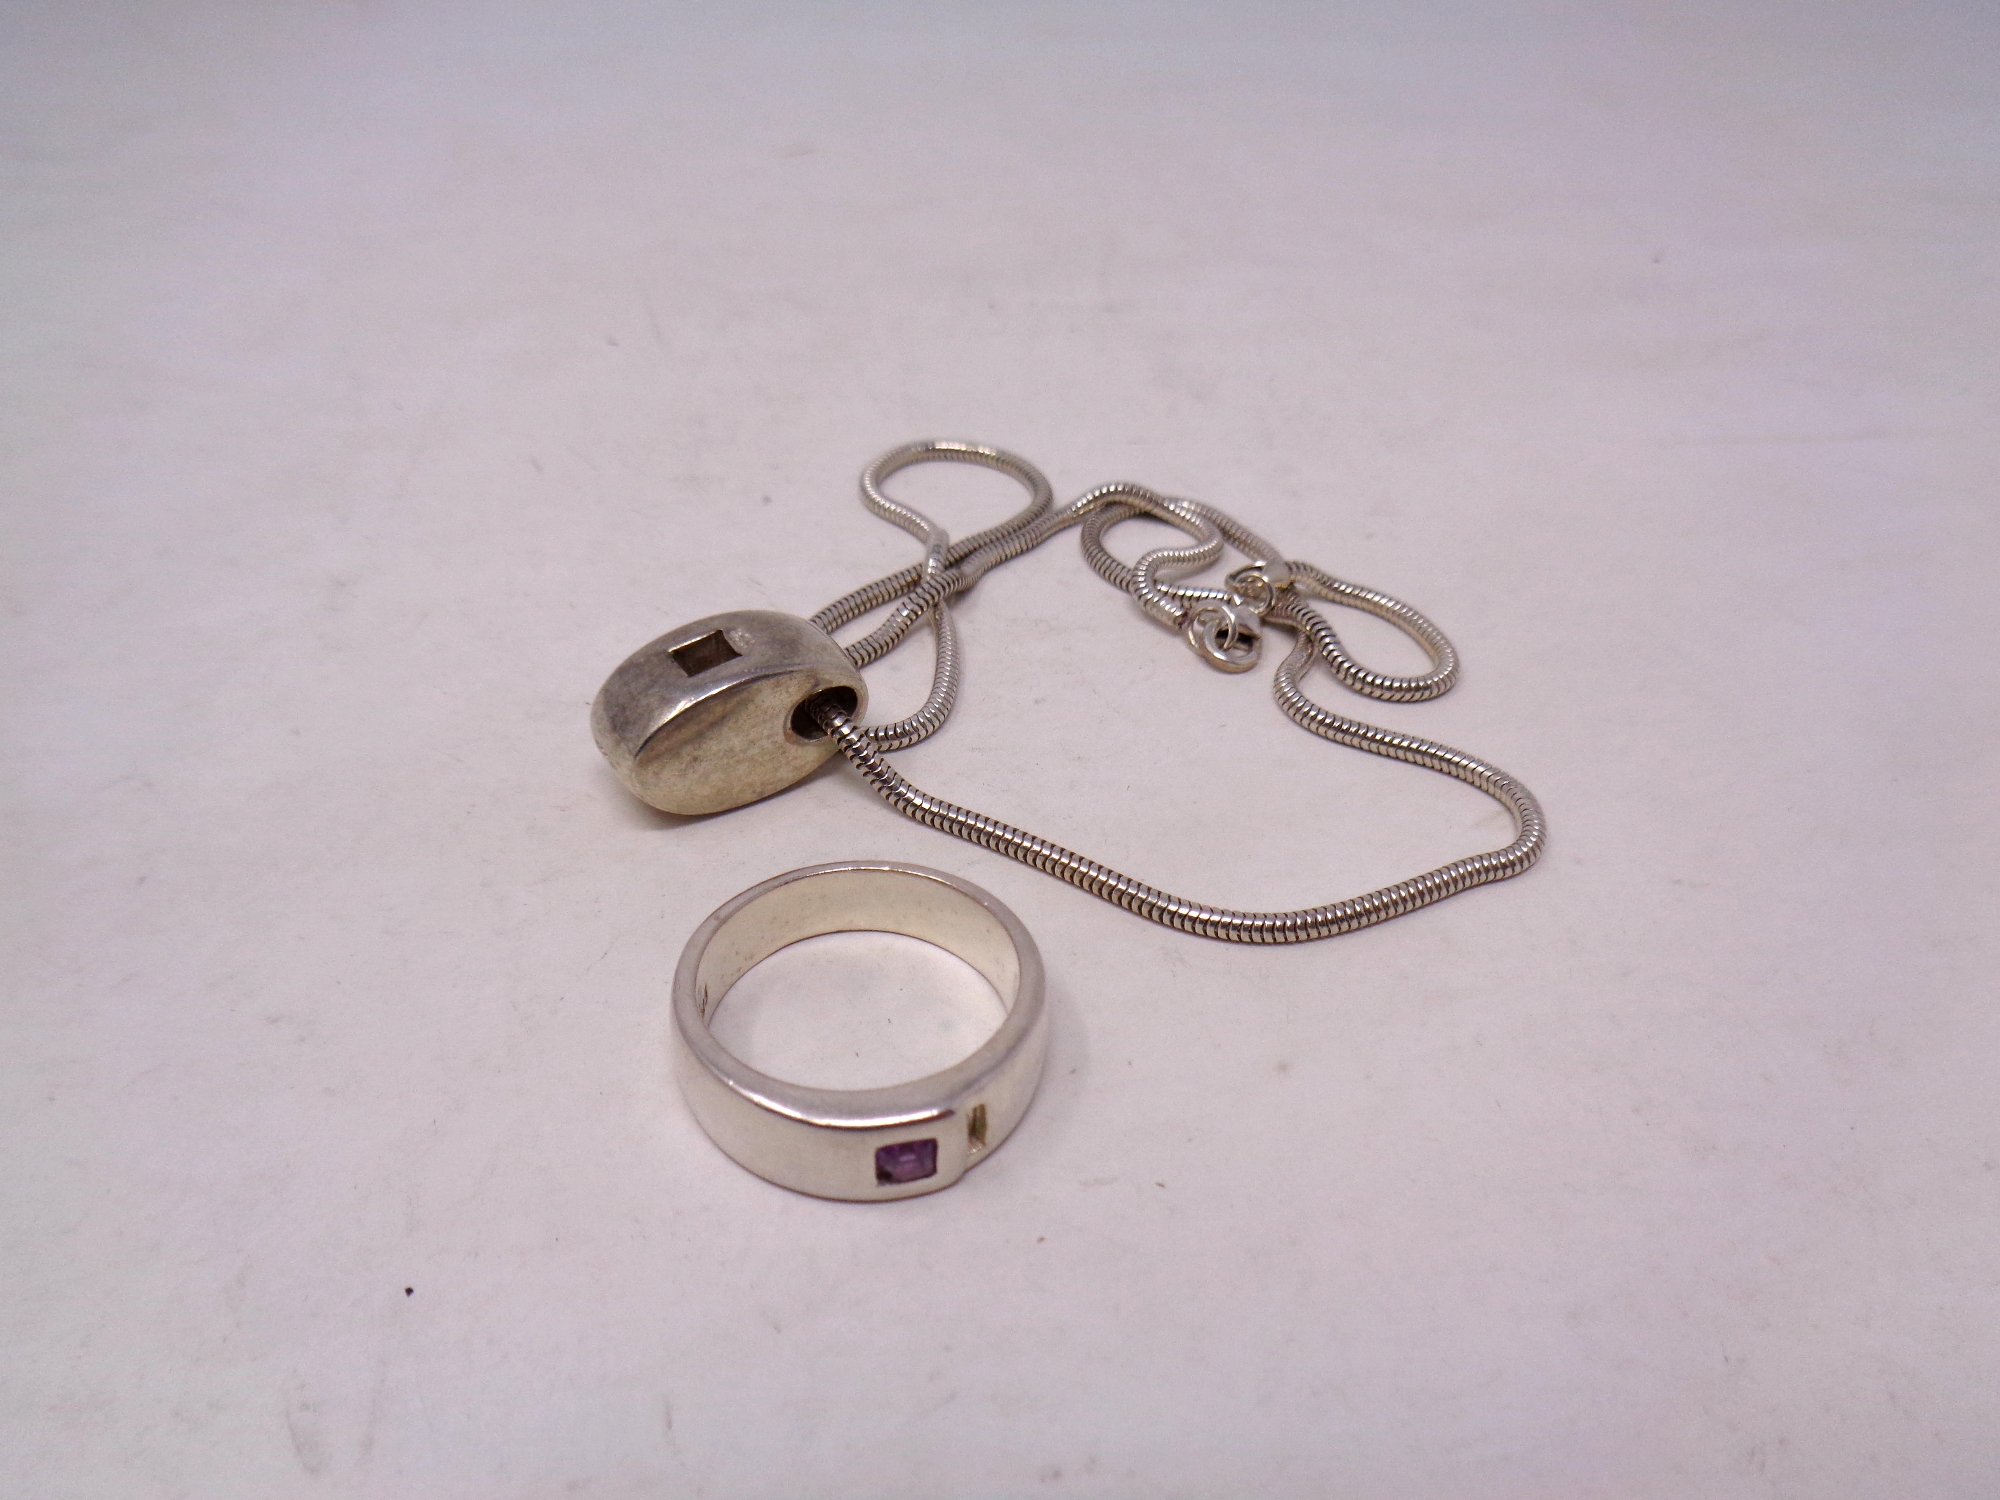 A silver ring pendant on chain